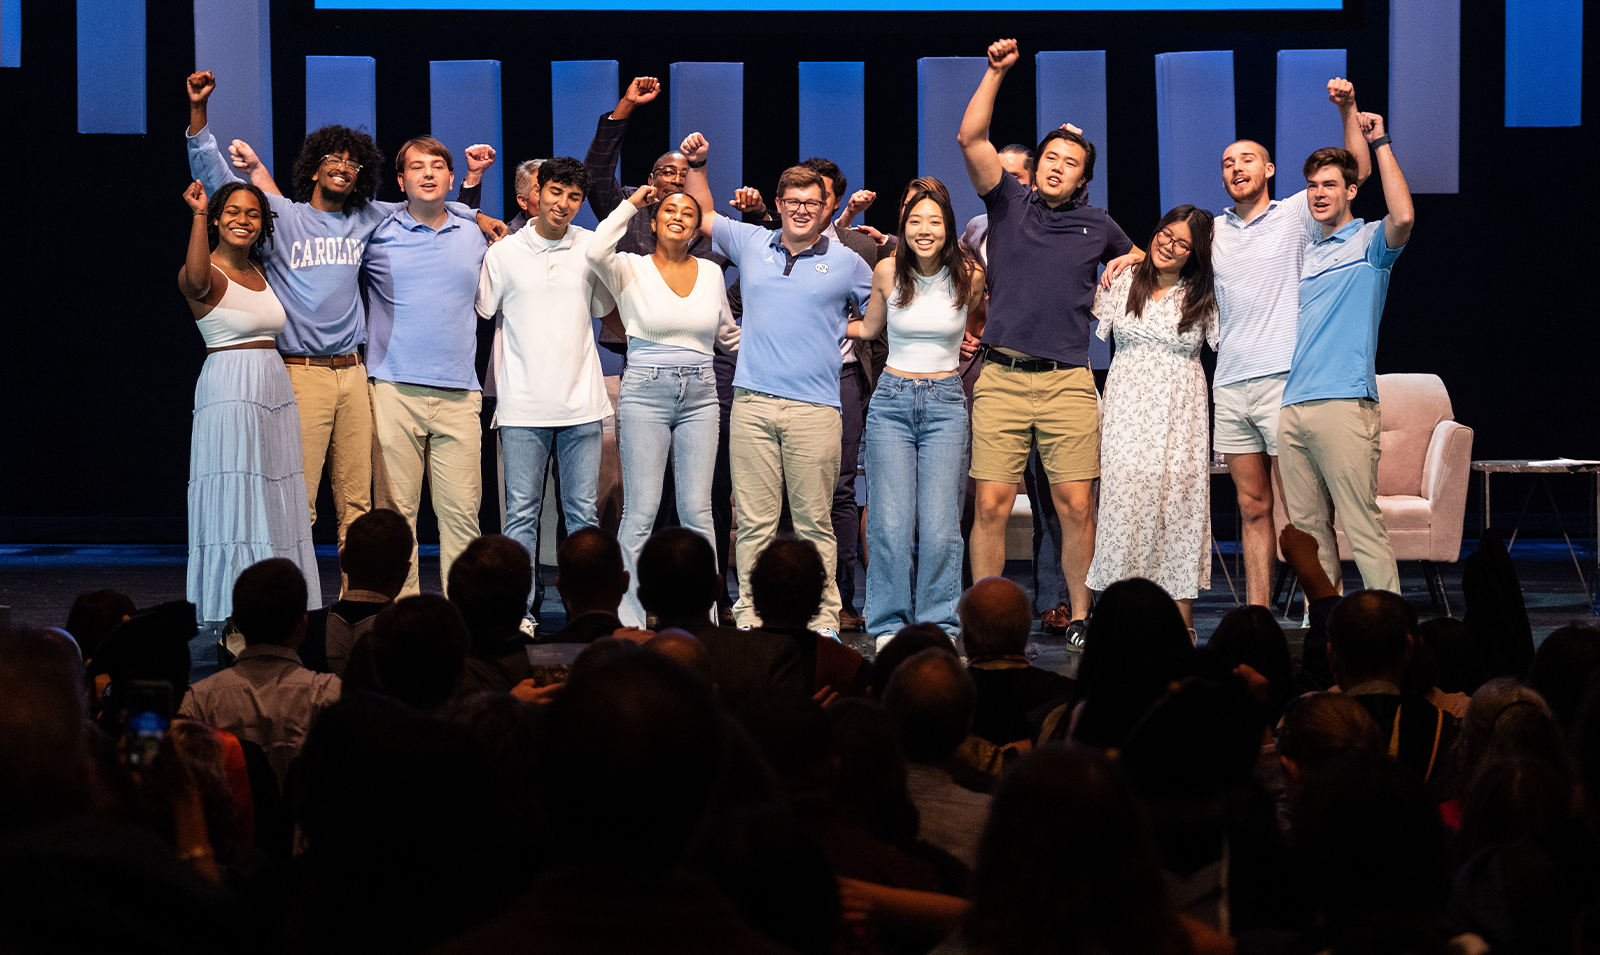 A group of students close together on stage and singing and chanting together.